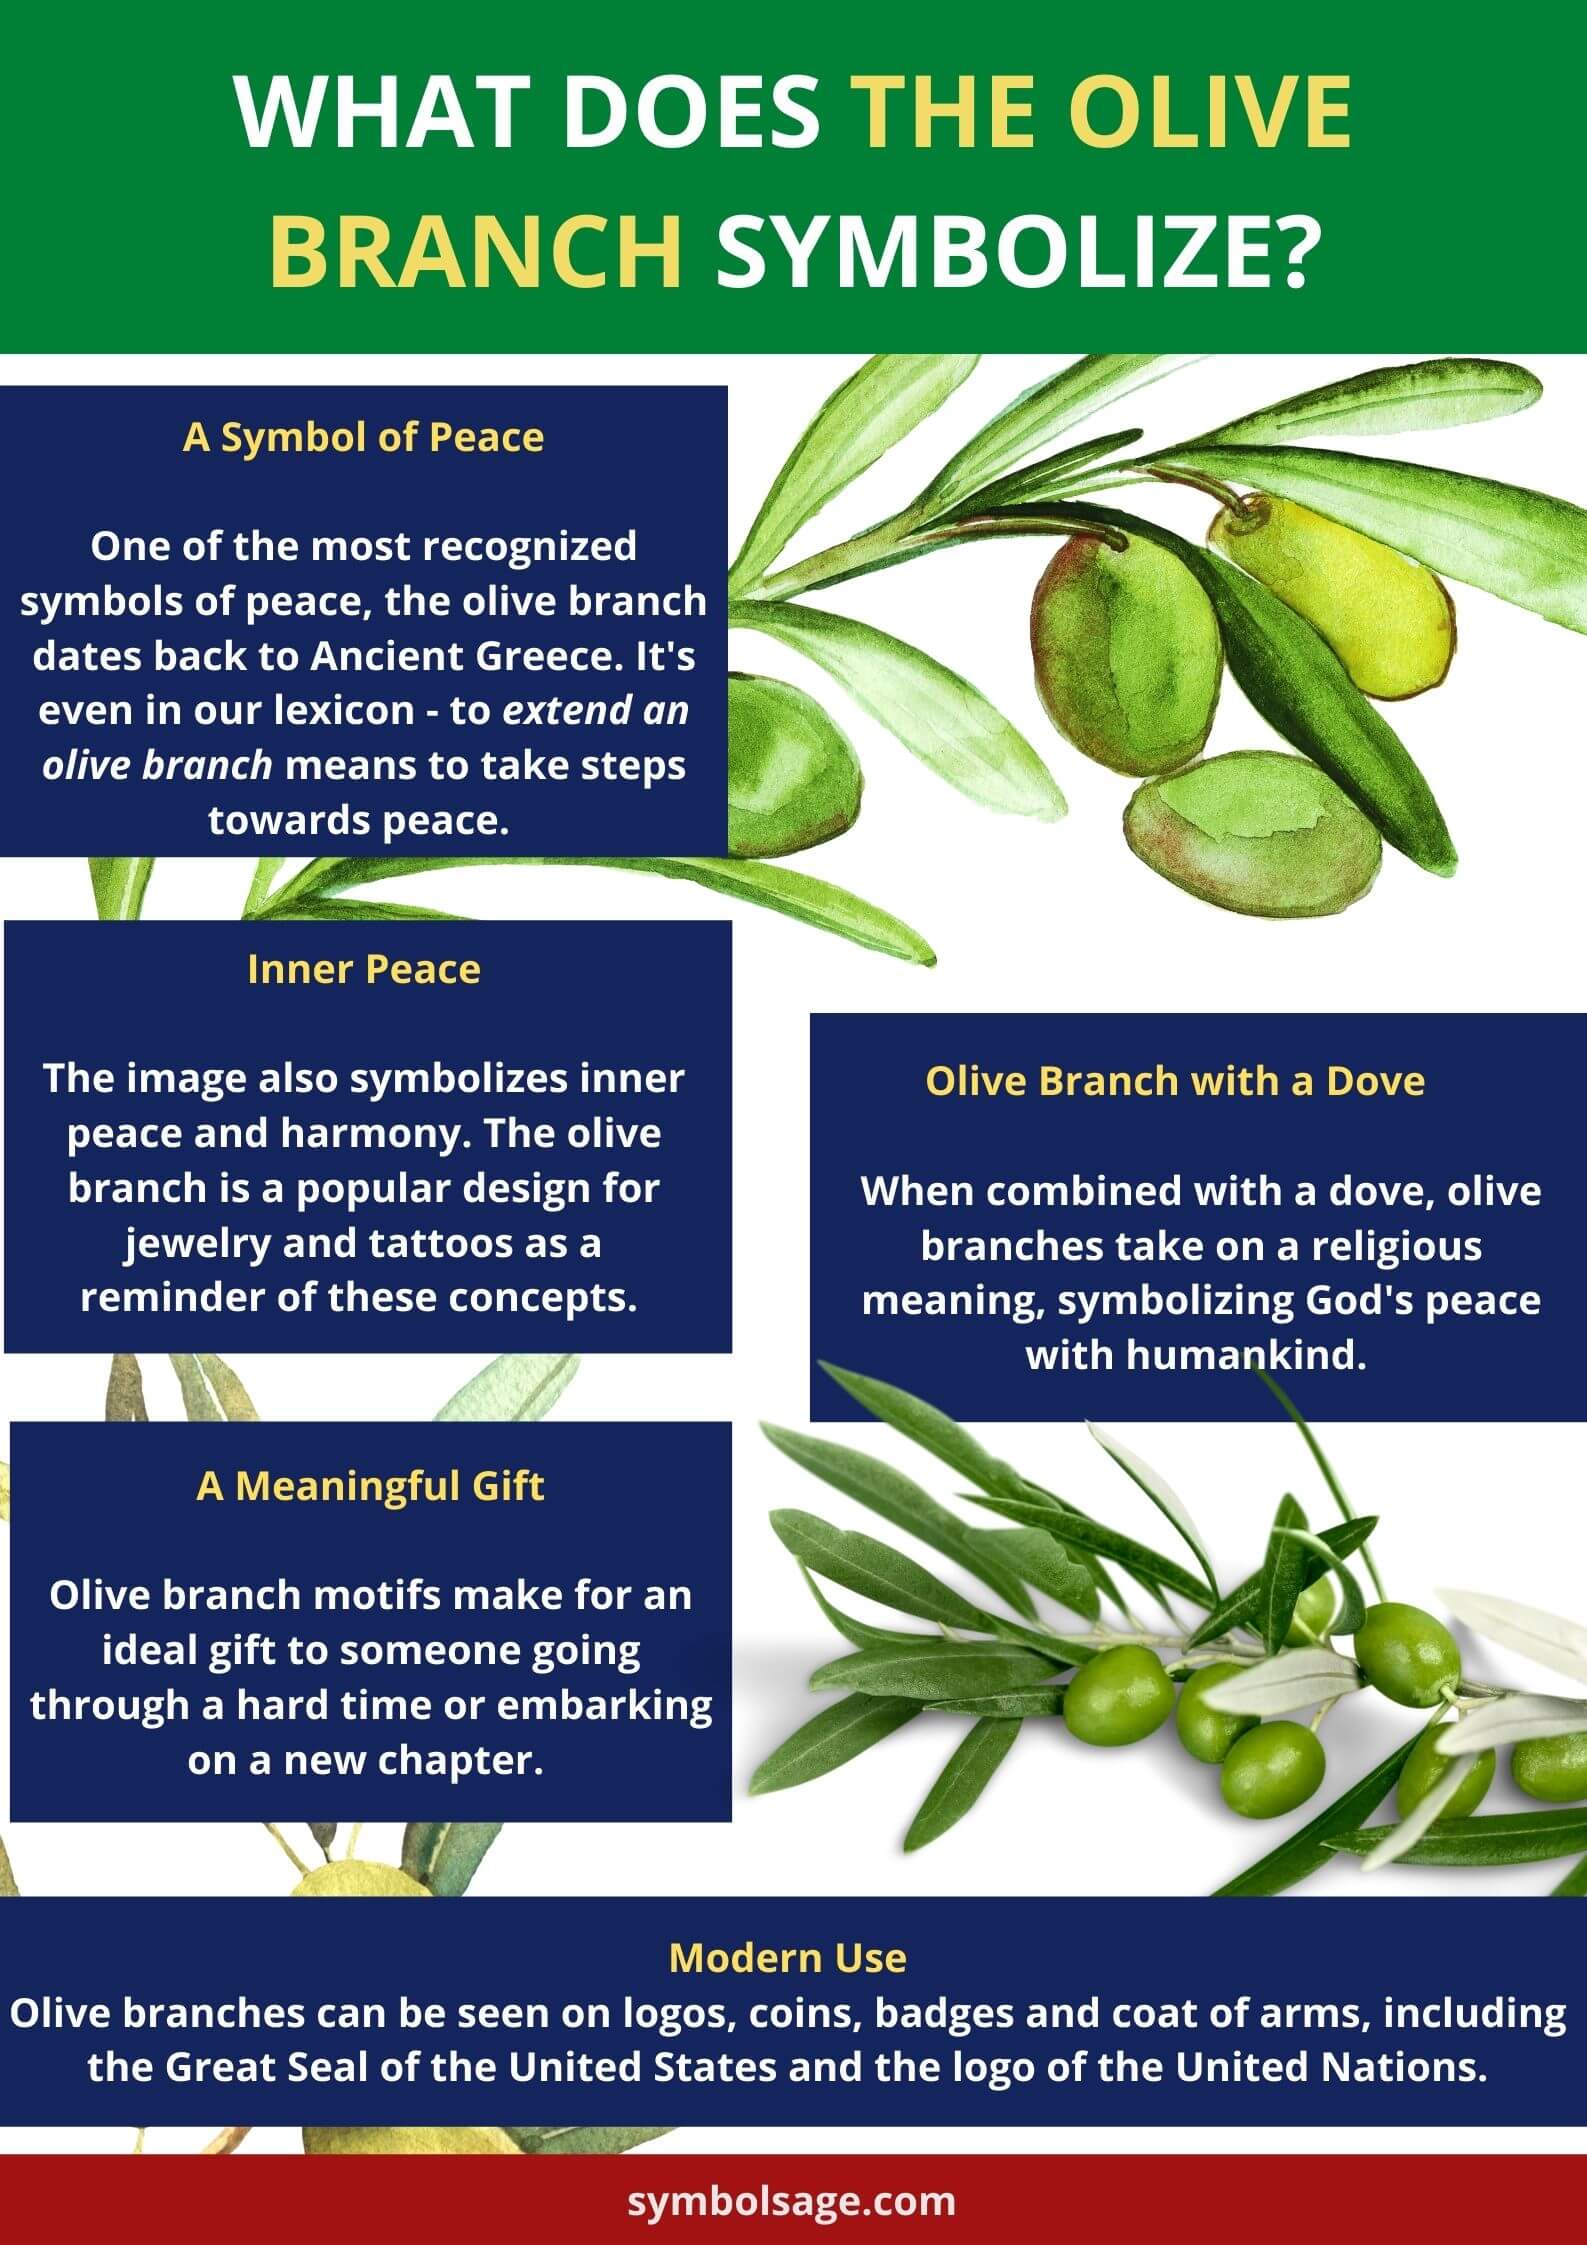 What does the olive branch signify?